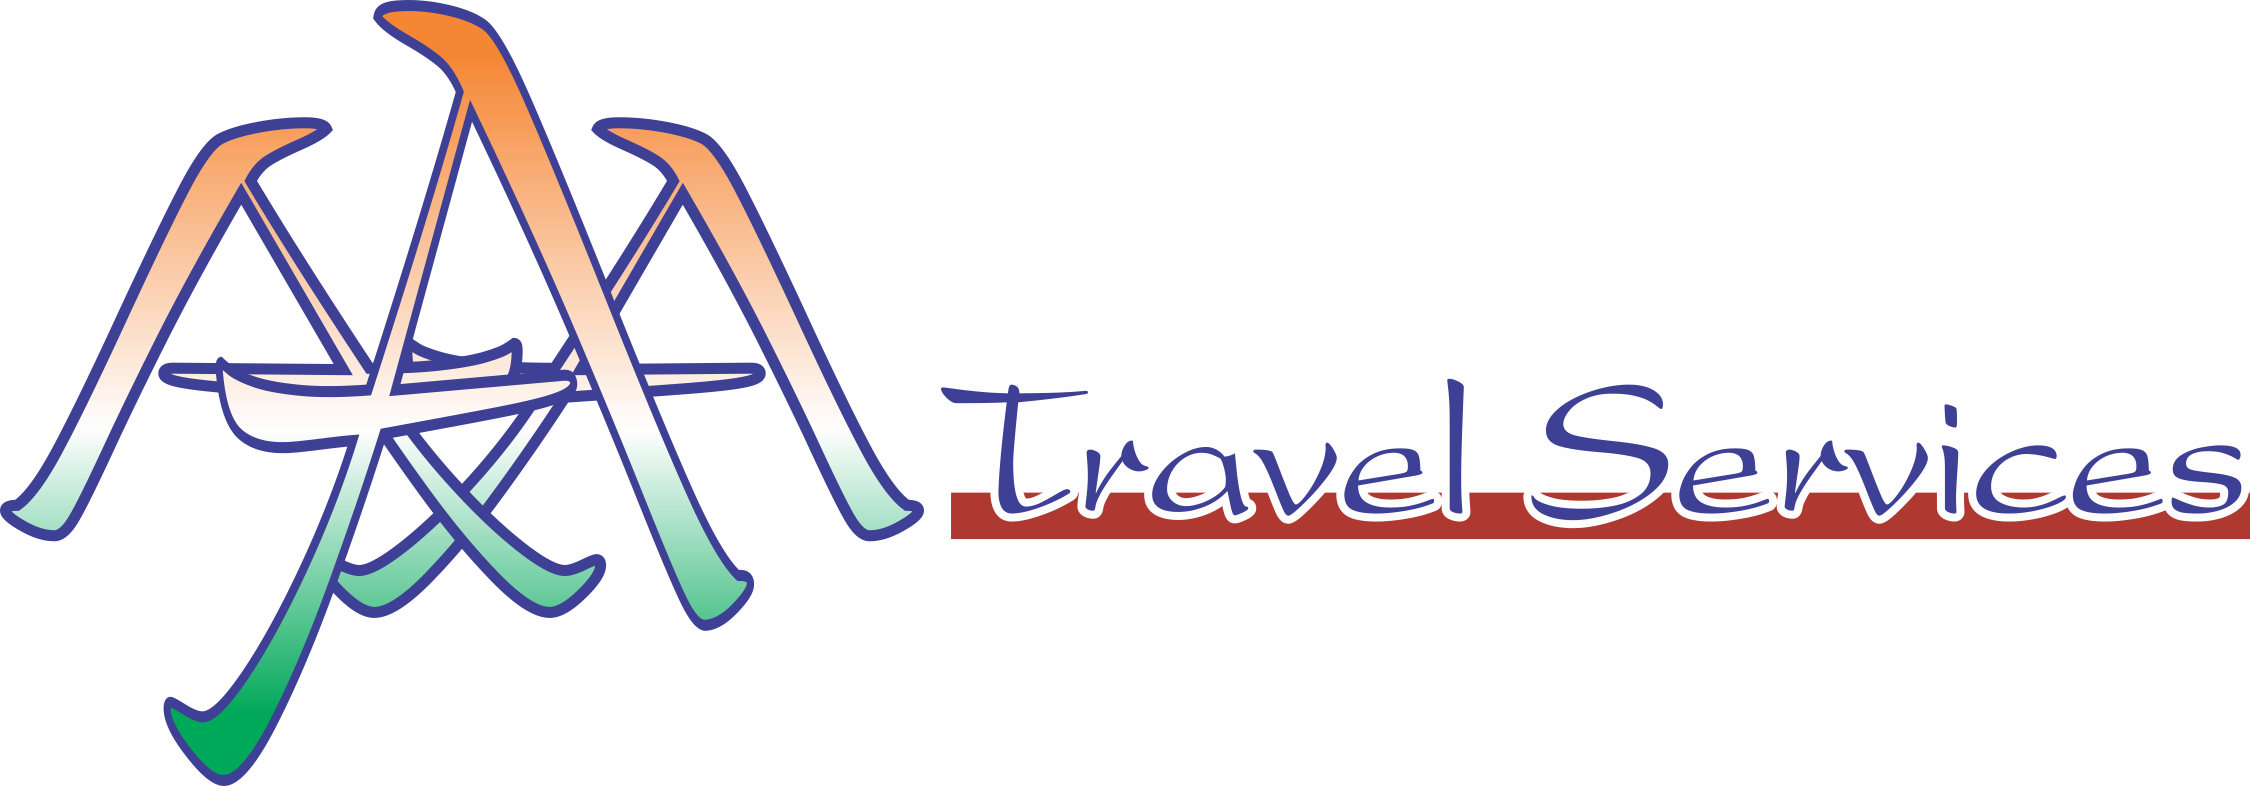 Aaa Travel Services - Aaa Travel, Transparent background PNG HD thumbnail